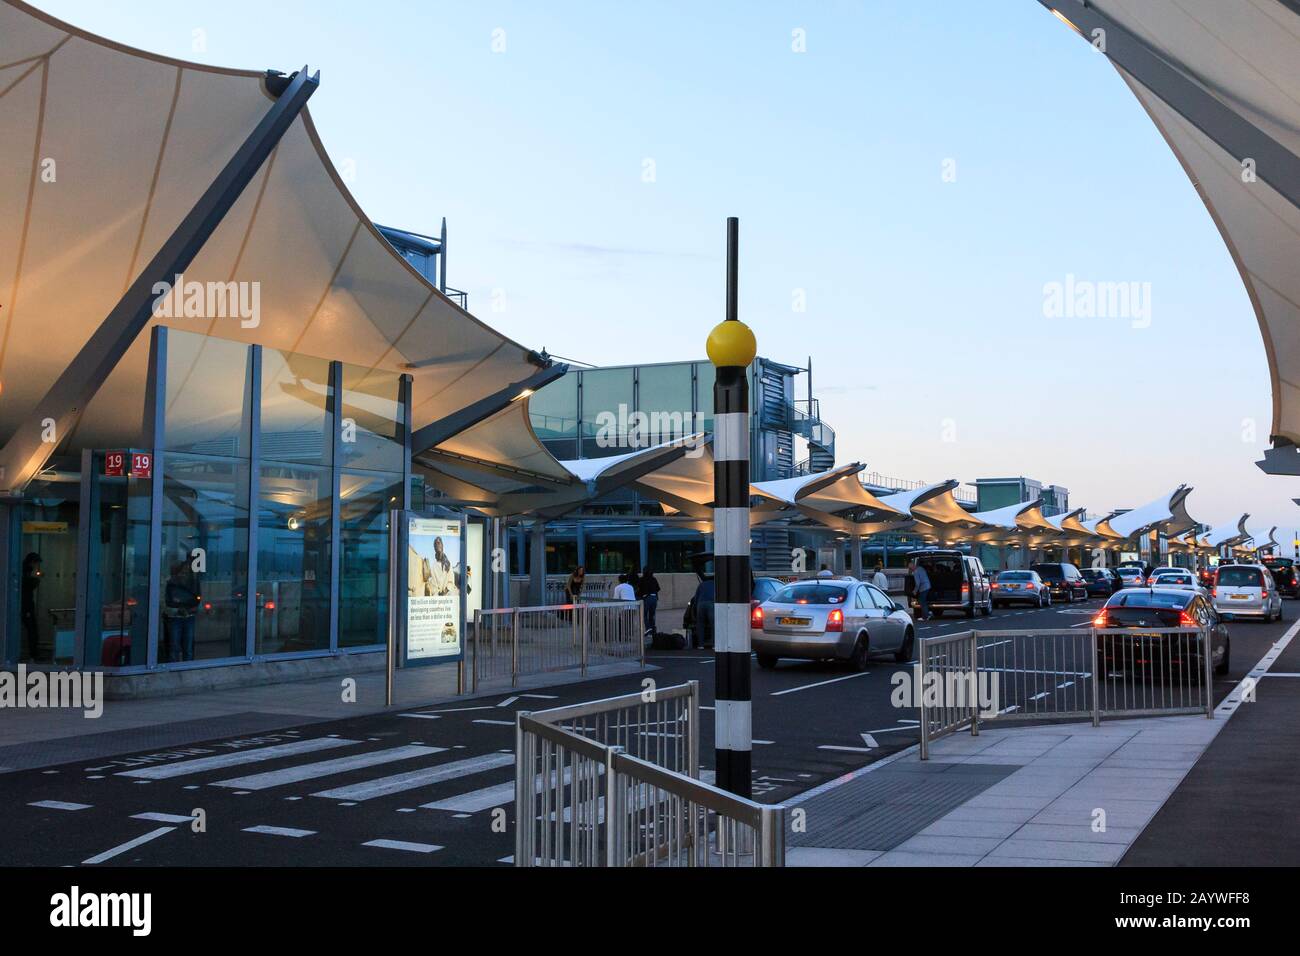 Heathrow Airport ,Treminal 5, Departures area, also known as London Heathrow, is a major international airport in London, United Kingdom.GB UK EU Stock Photo